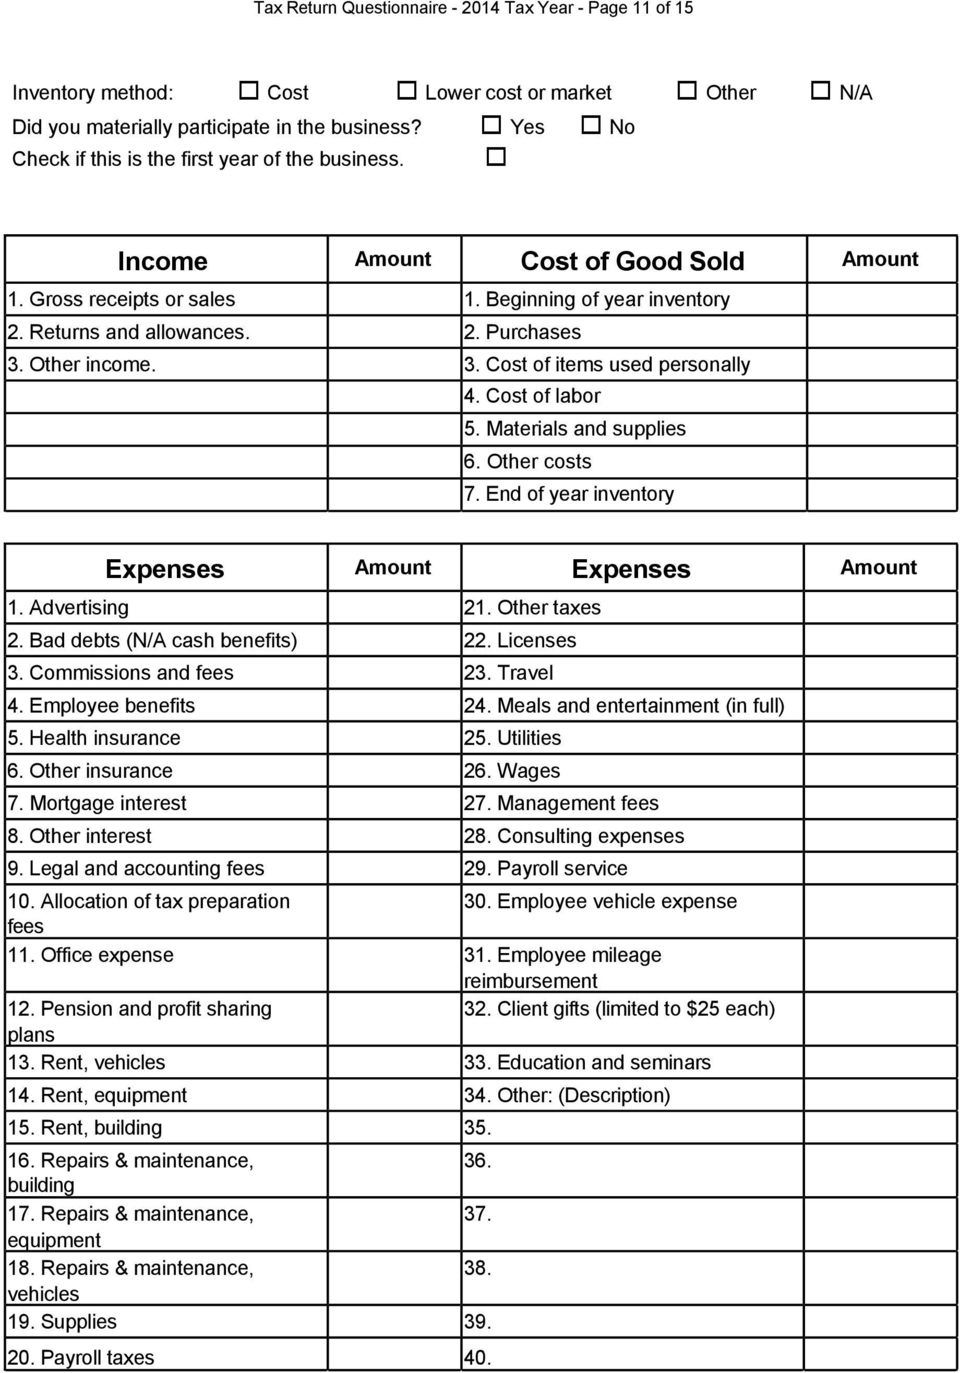 Other income. 3. Cost of items used personally 4. Cost of labor 5. Materials and supplies 6. Other costs 7. End of year inventory Expenses Expenses 1. Advertising 21. Other taxes 2.